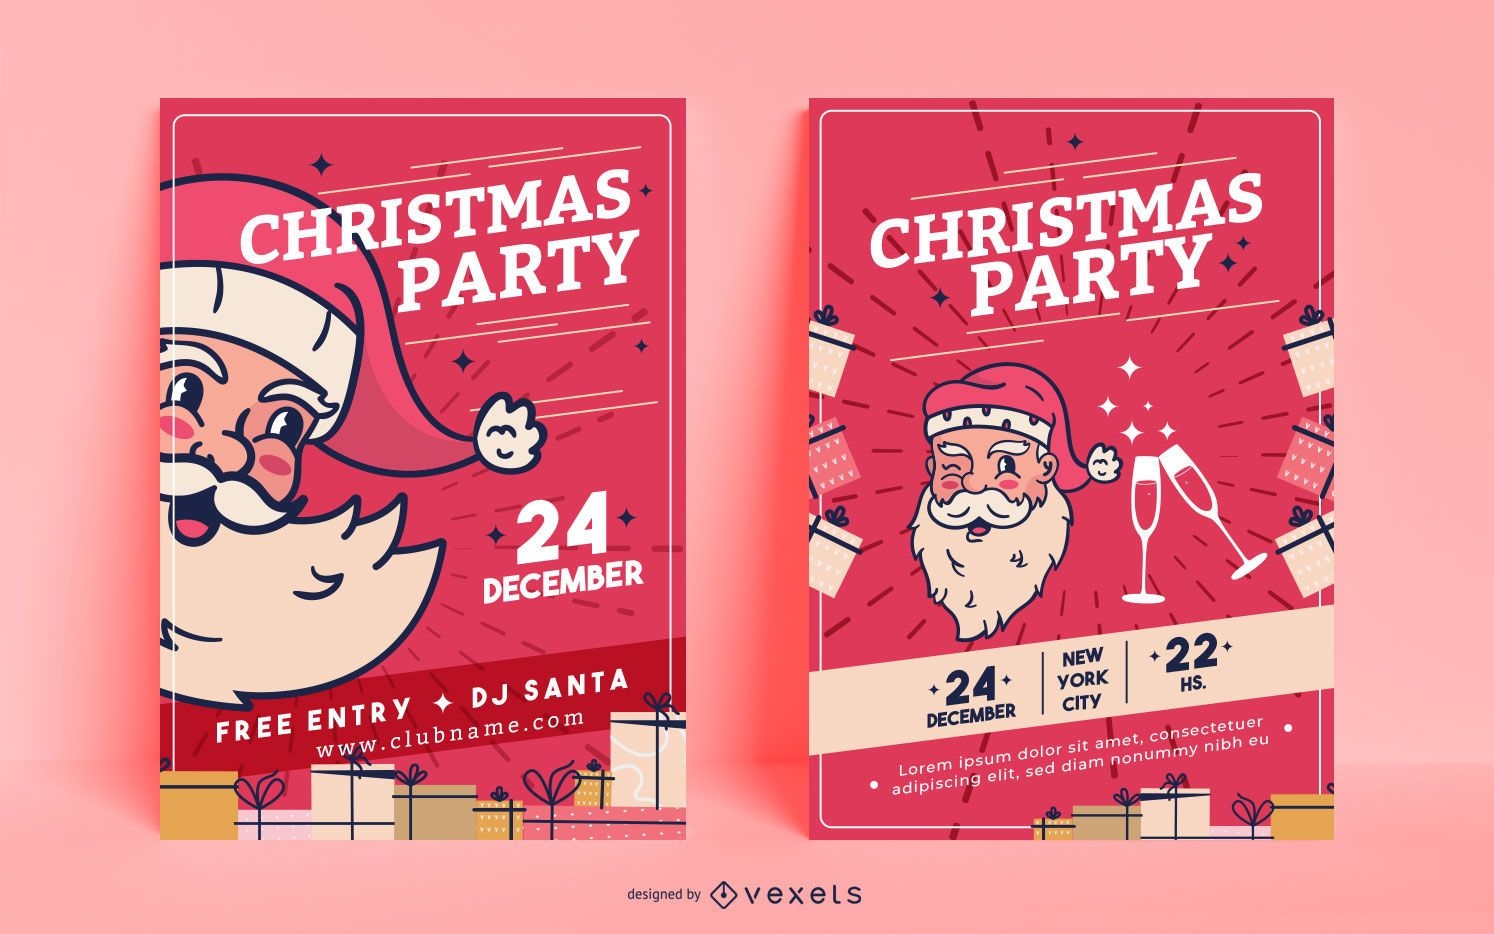 Christmas party invitation posters